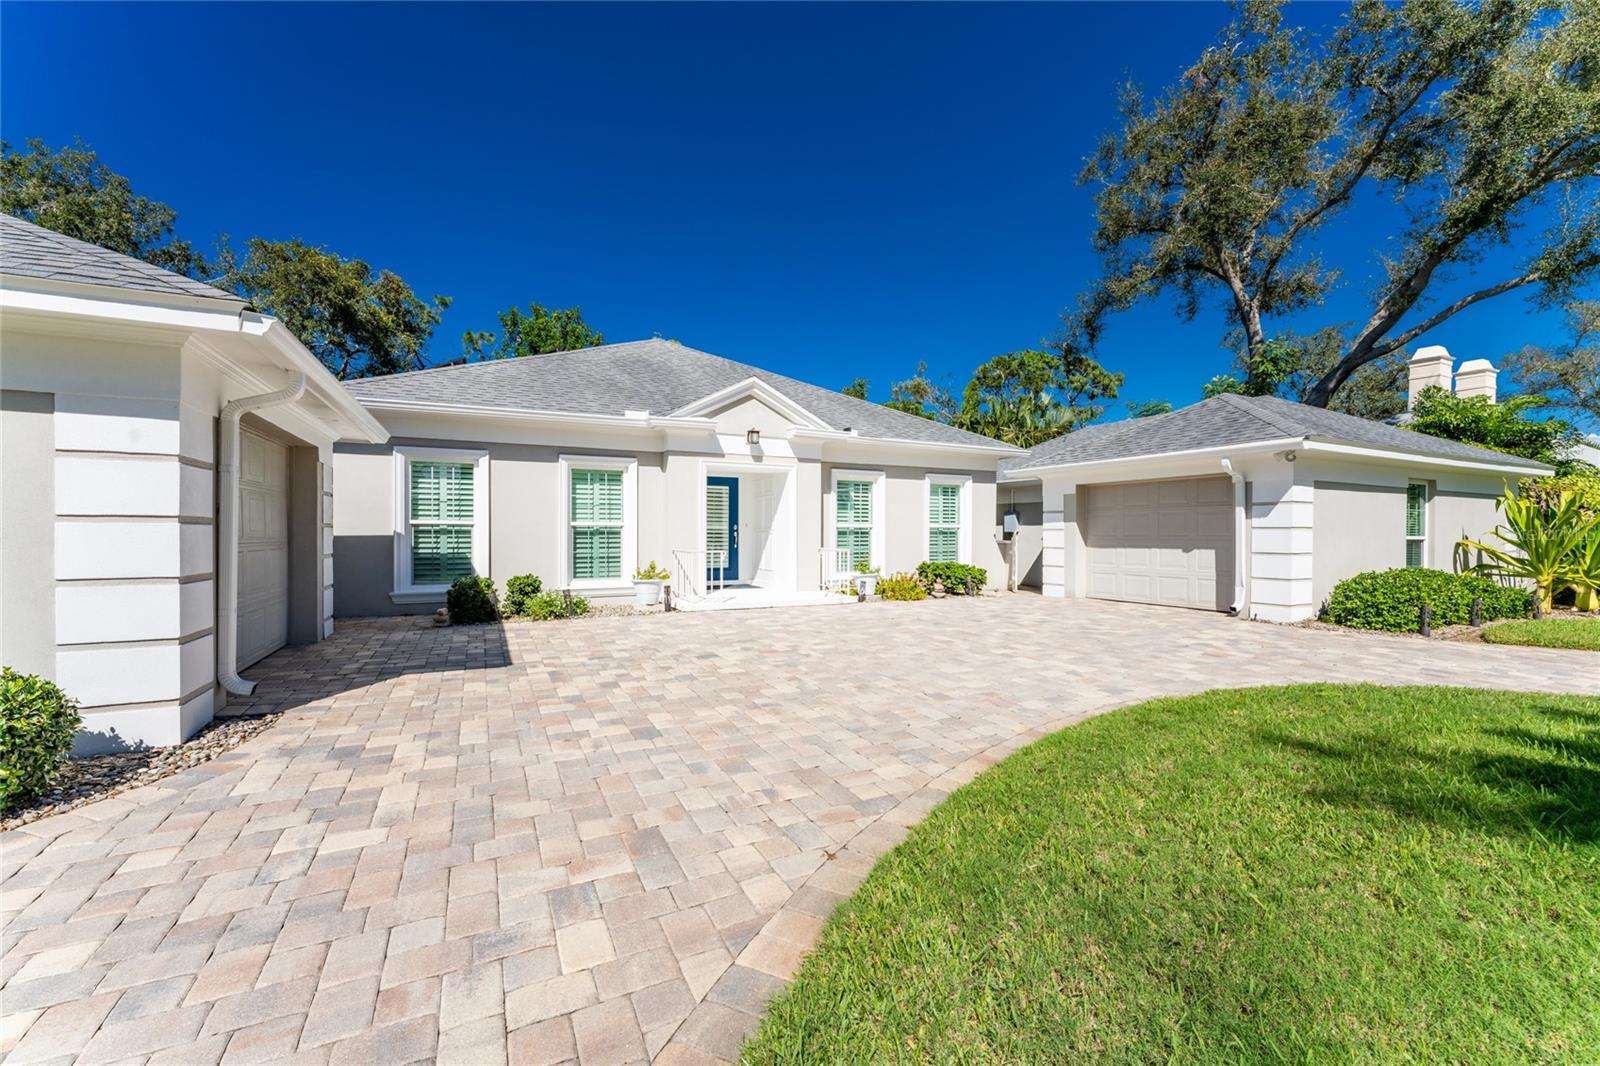 Photo one of 16 Golf View Dr Englewood FL 34223 | MLS D6132971